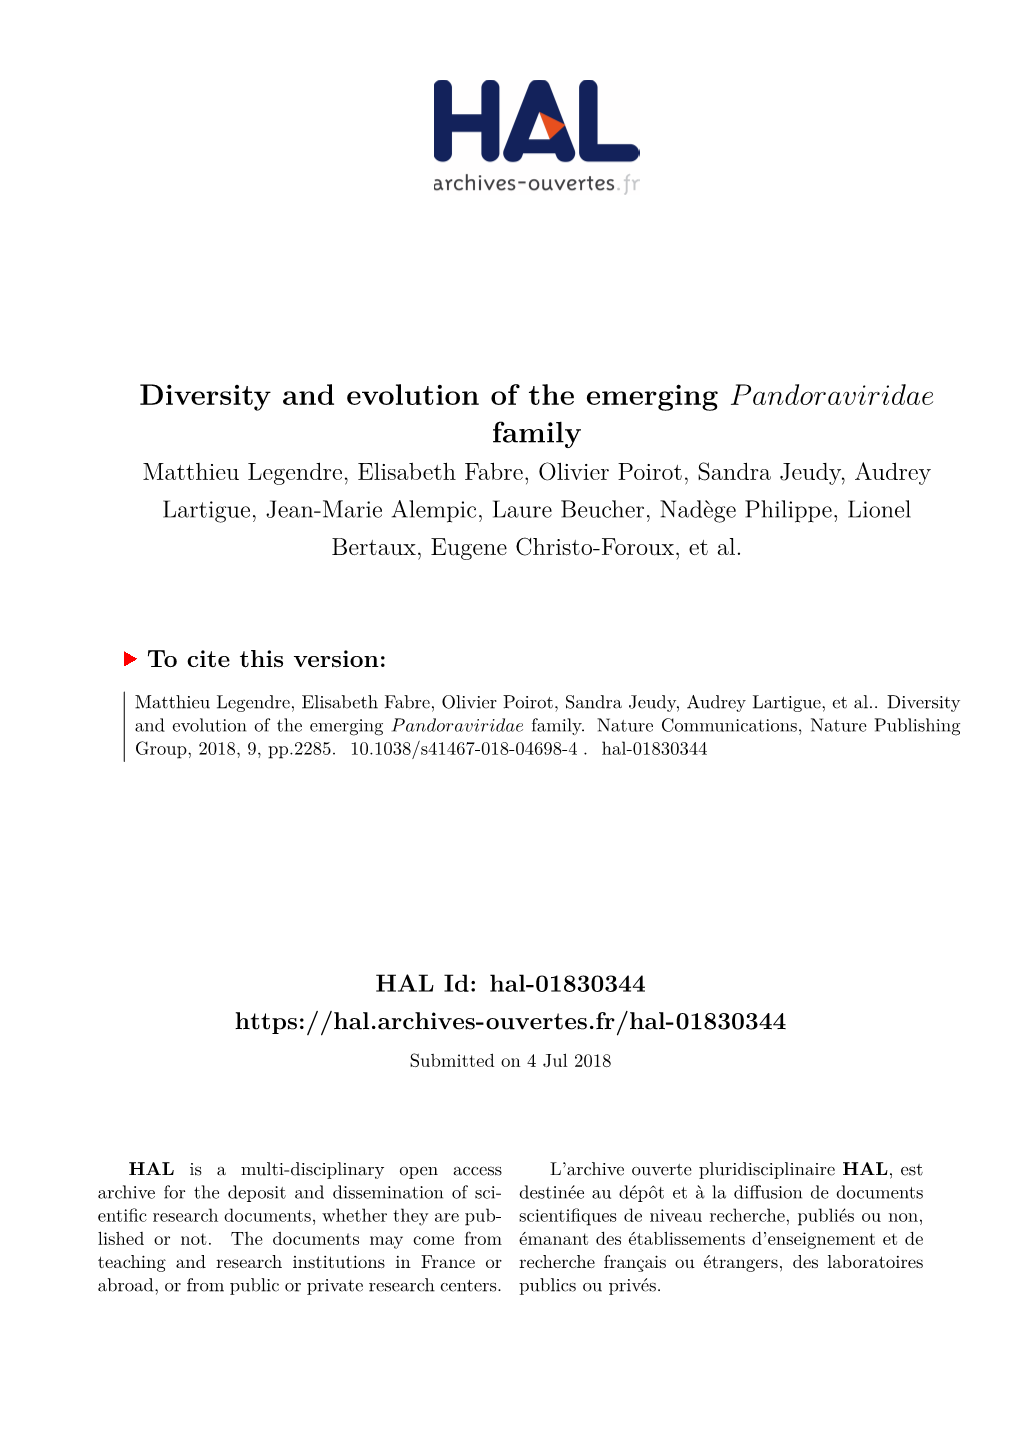 Diversity and Evolution of the Emerging